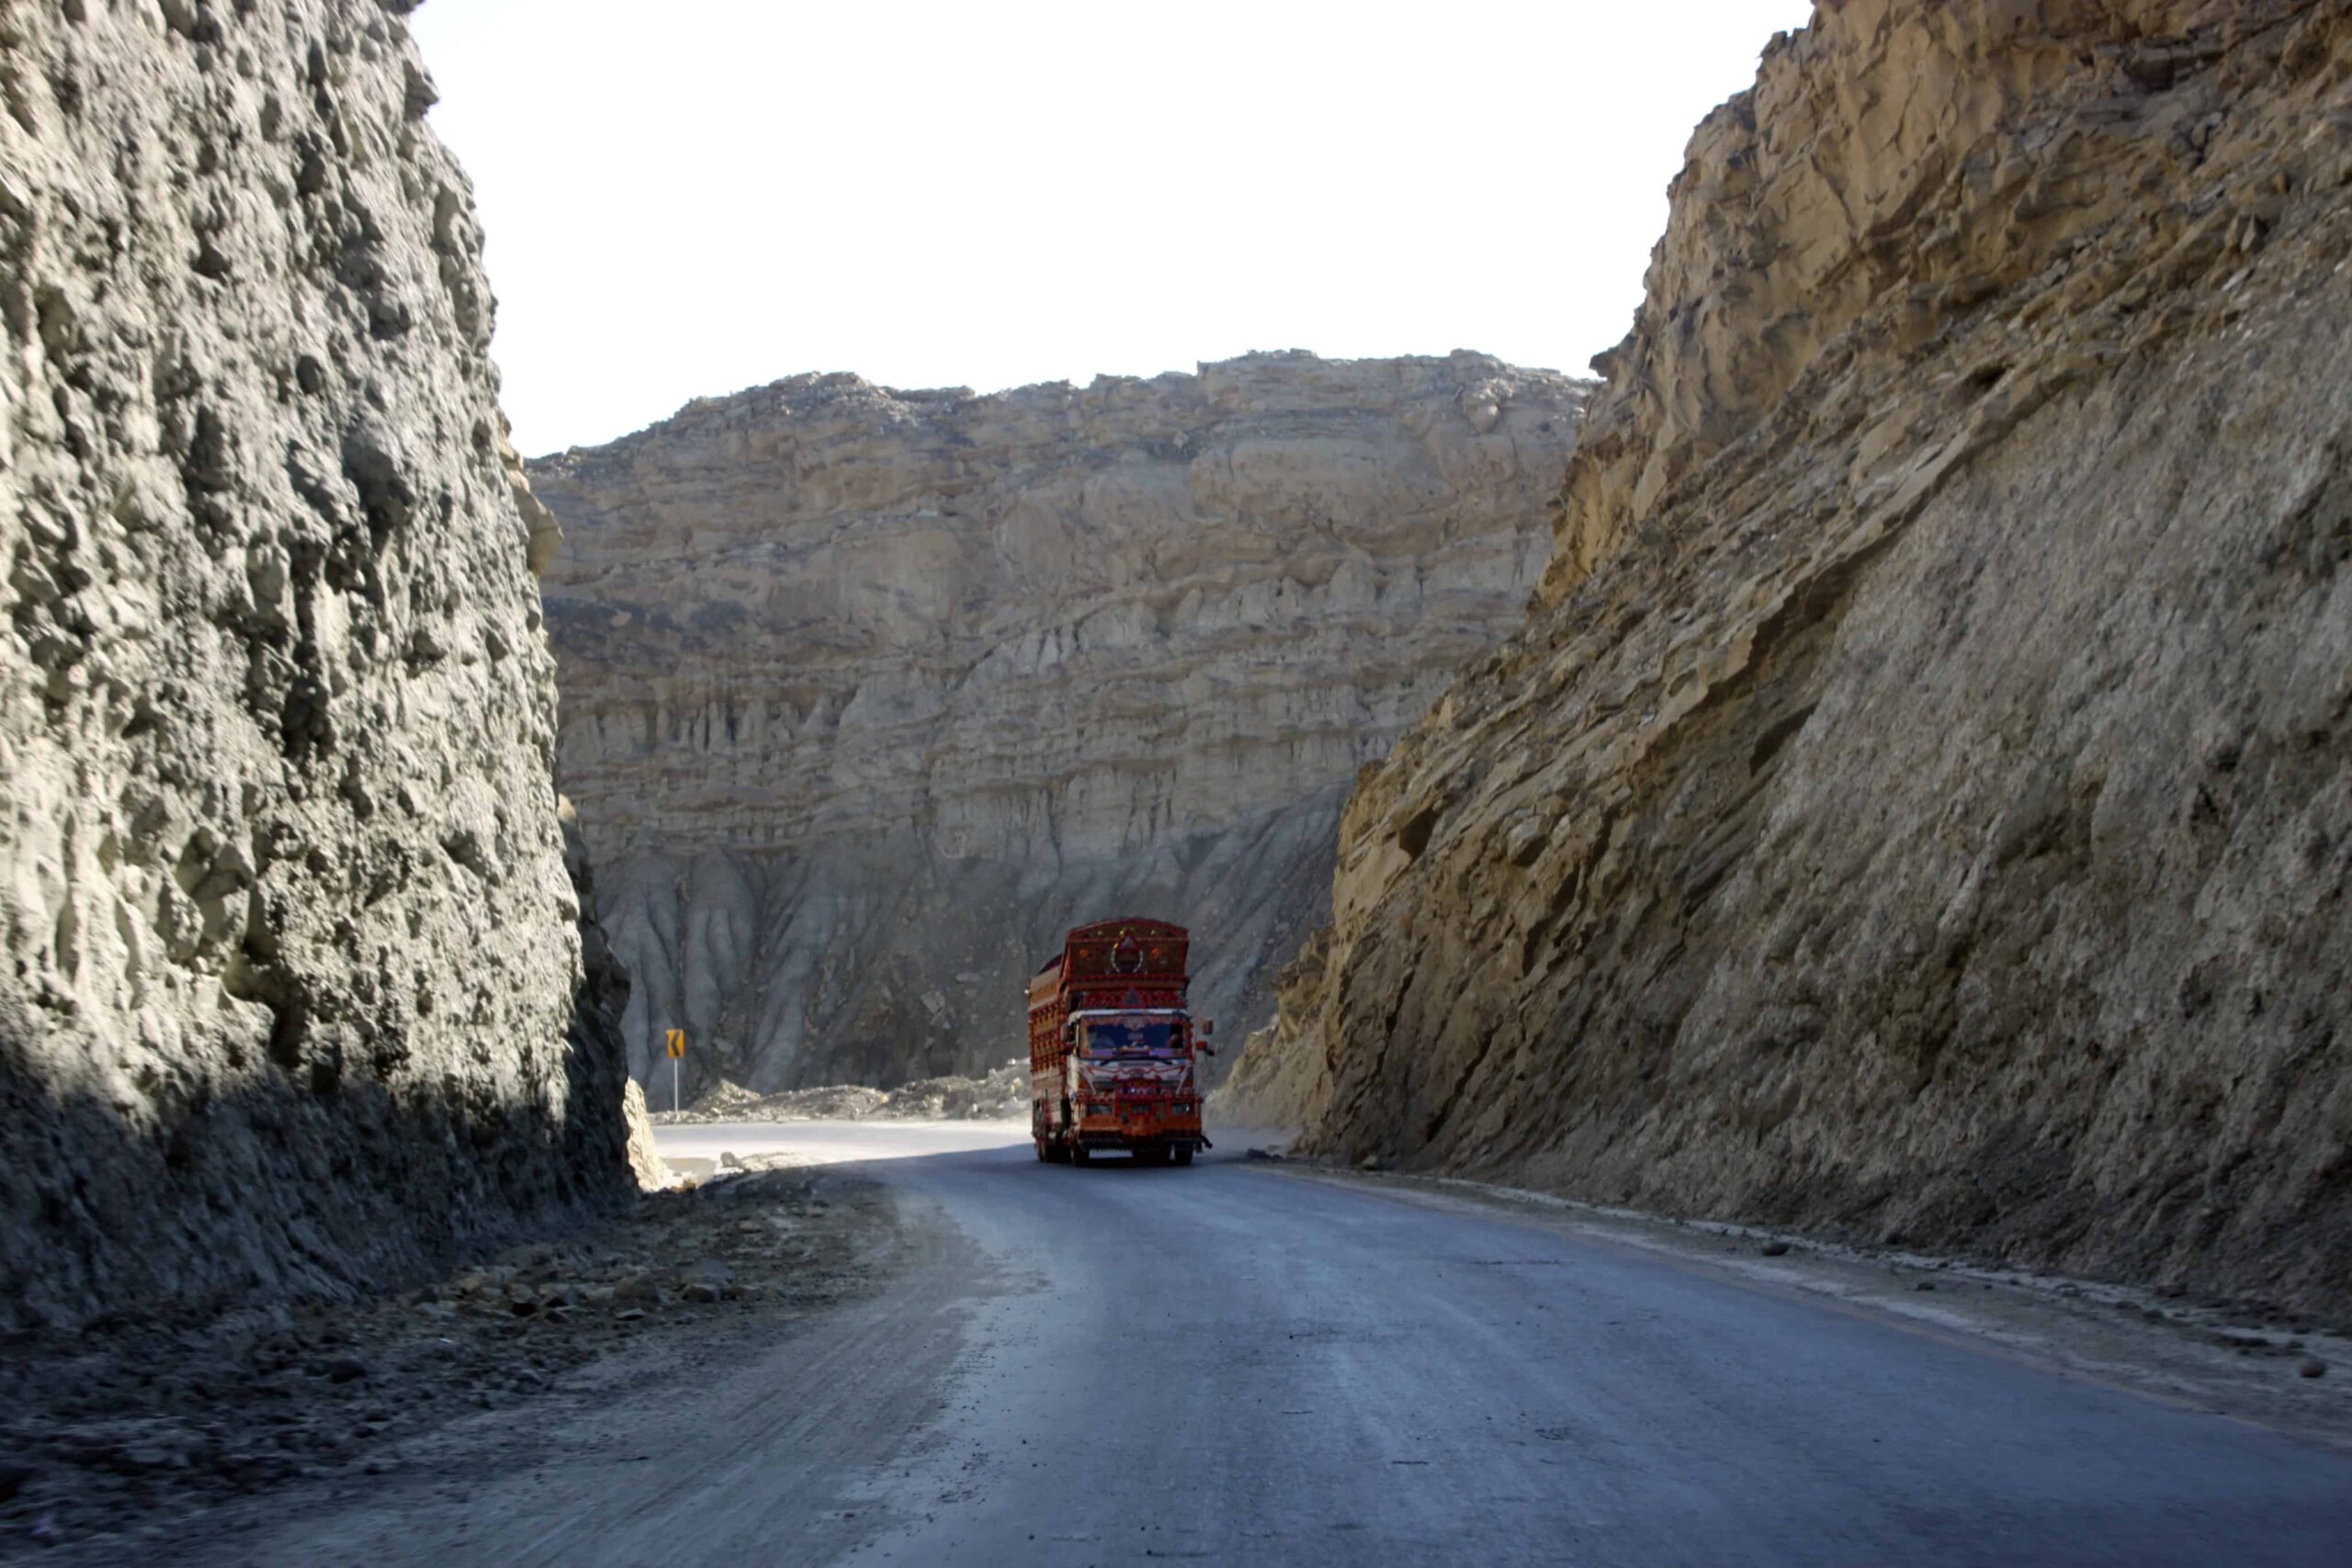 A truck travels on a highway with high cliffs on both sides.